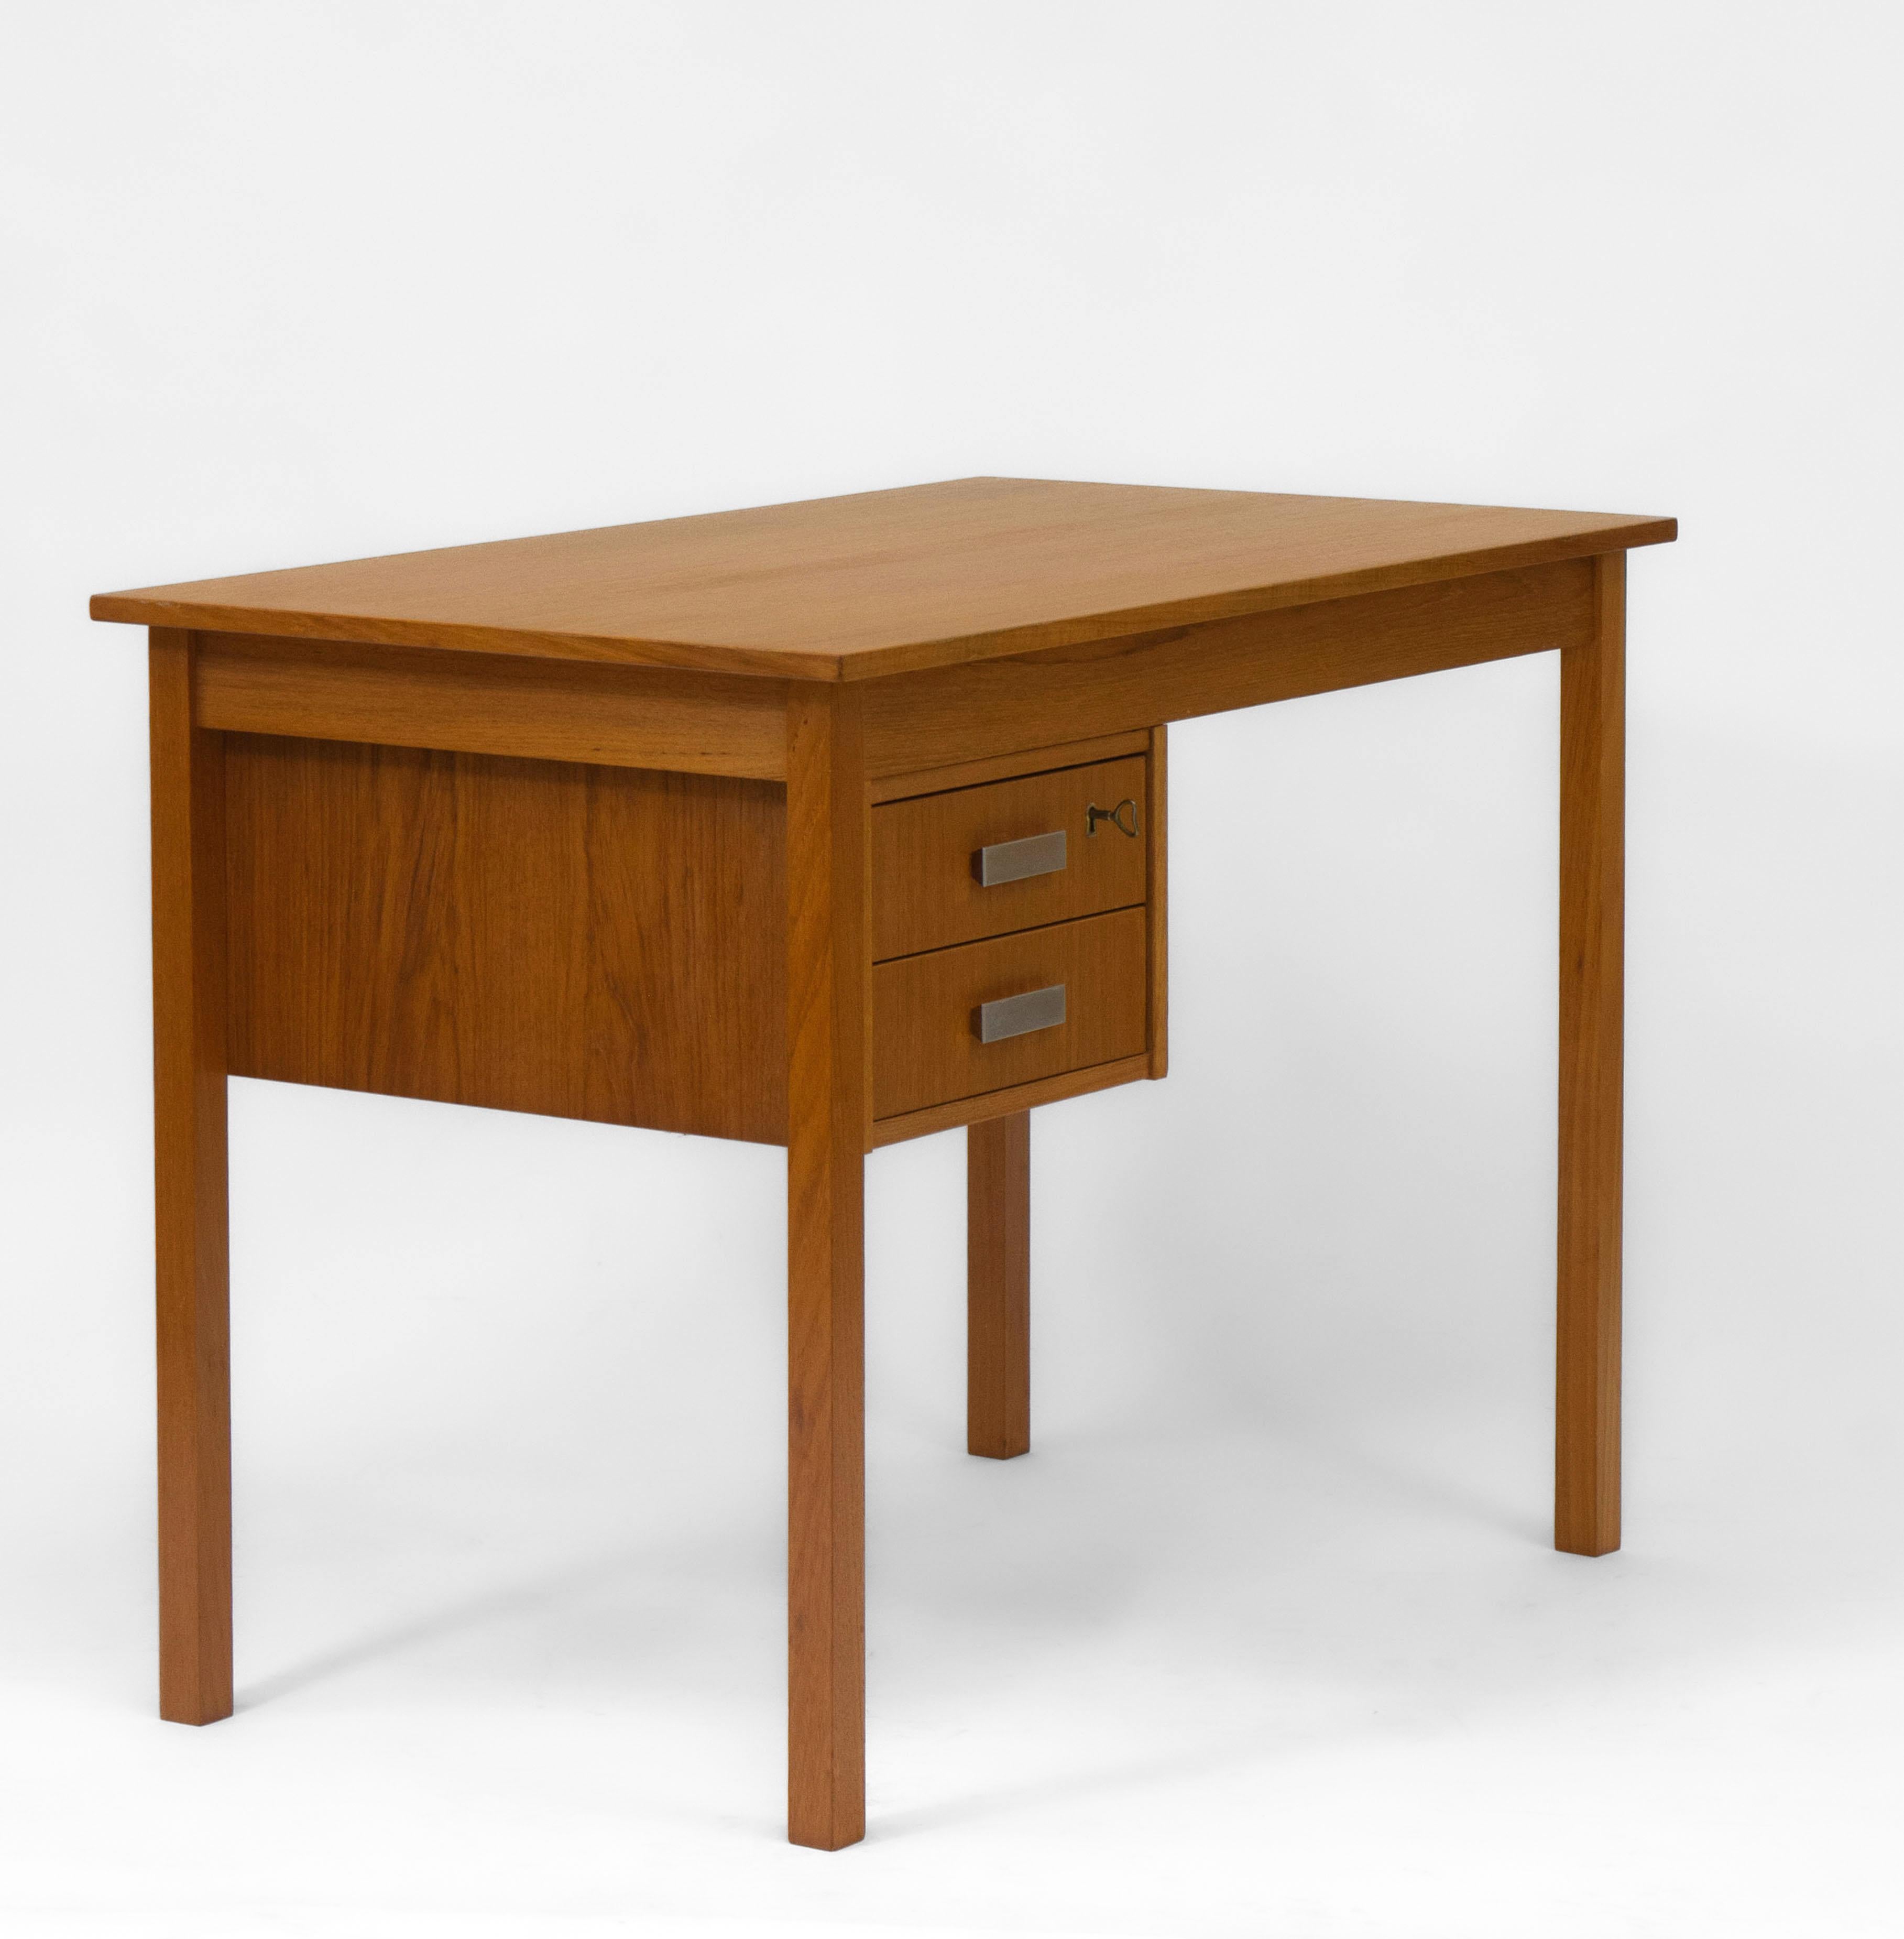 Scandinavian mid century teak desk with contrasting aluminium faced drawer handles. Circa 1960s.

The desk is in very good clean condition, showing very light wear. There is no damage. A very slightly darker patch to the back right hand side of